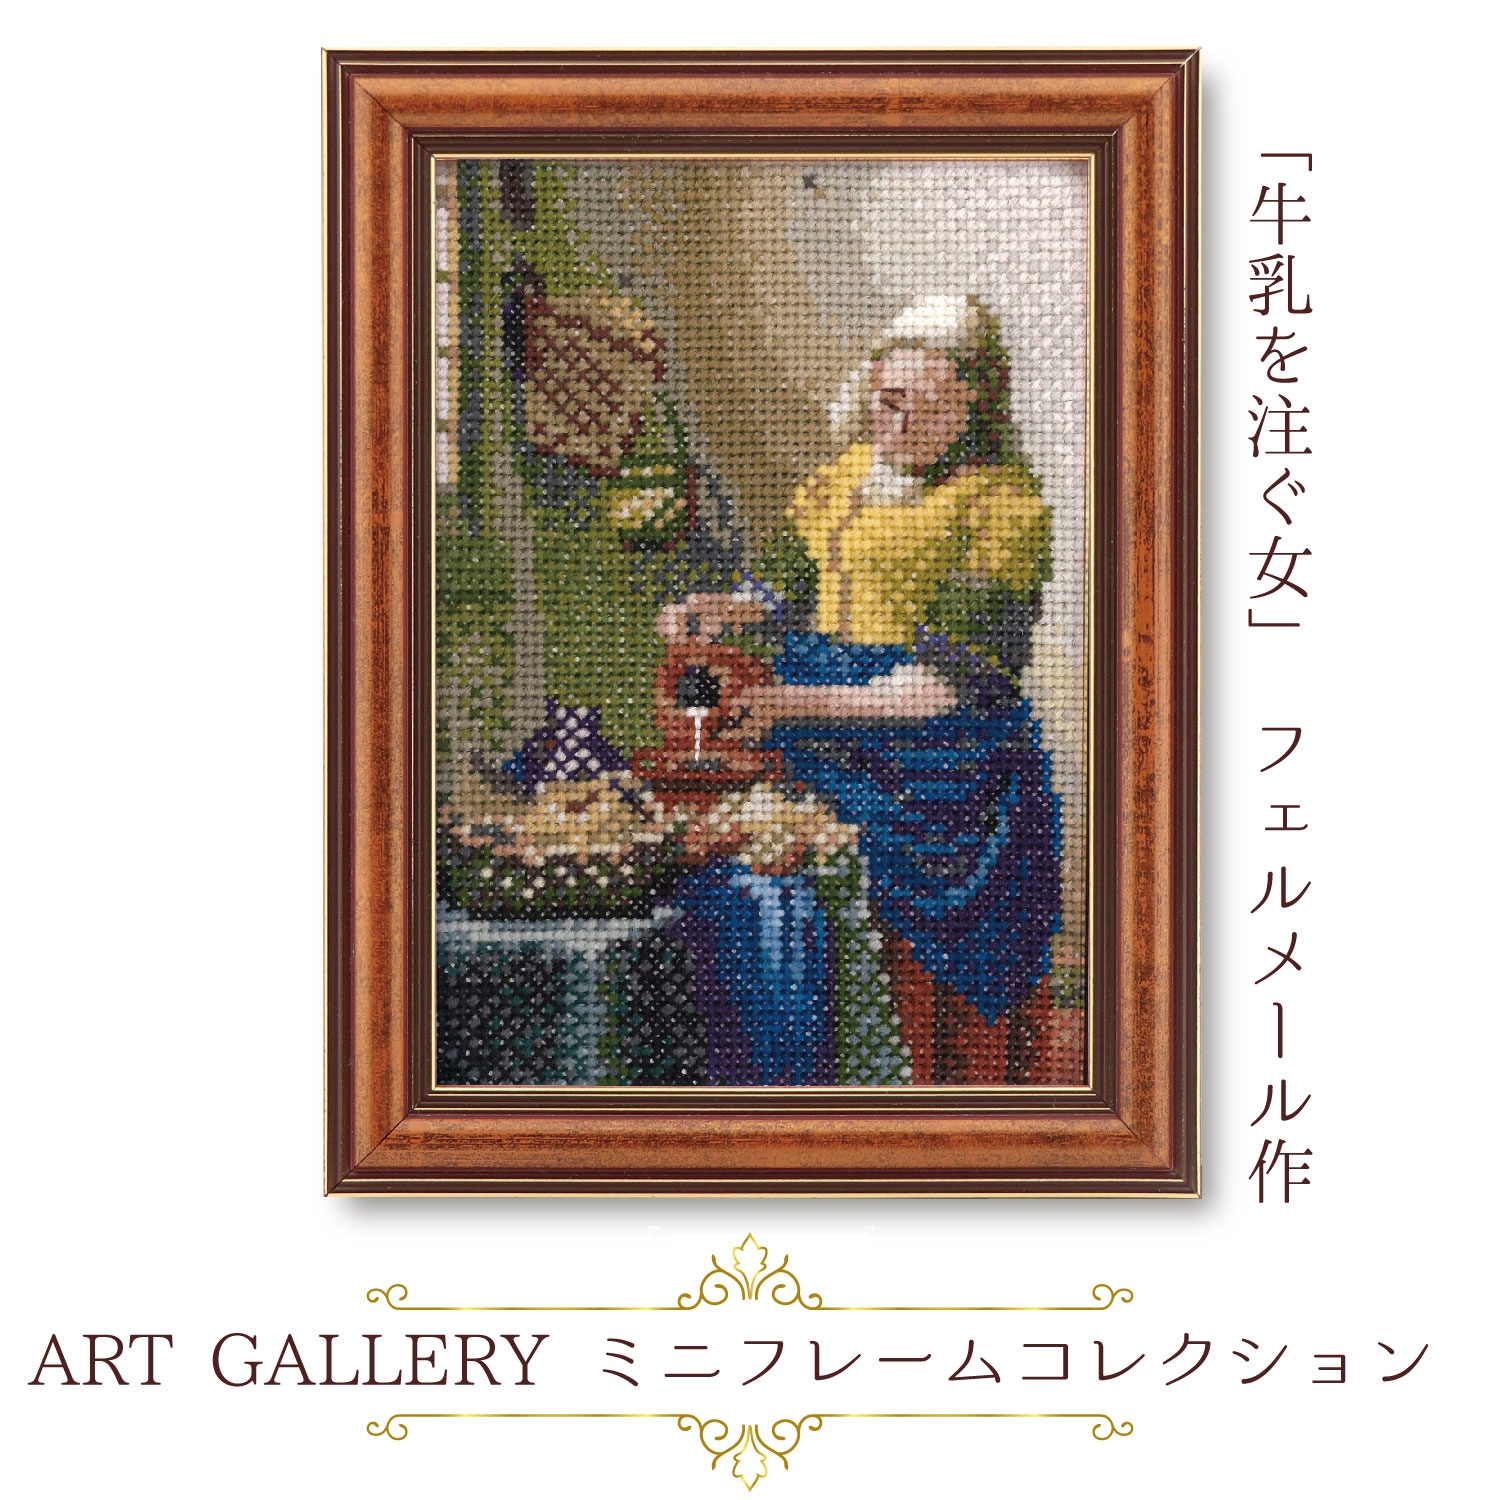 OLY-K7586 OLYMPUS Embroidery Kit ART GALLERY Mini Frame Collection "The Milkmaid" by Vermeer (pcs)